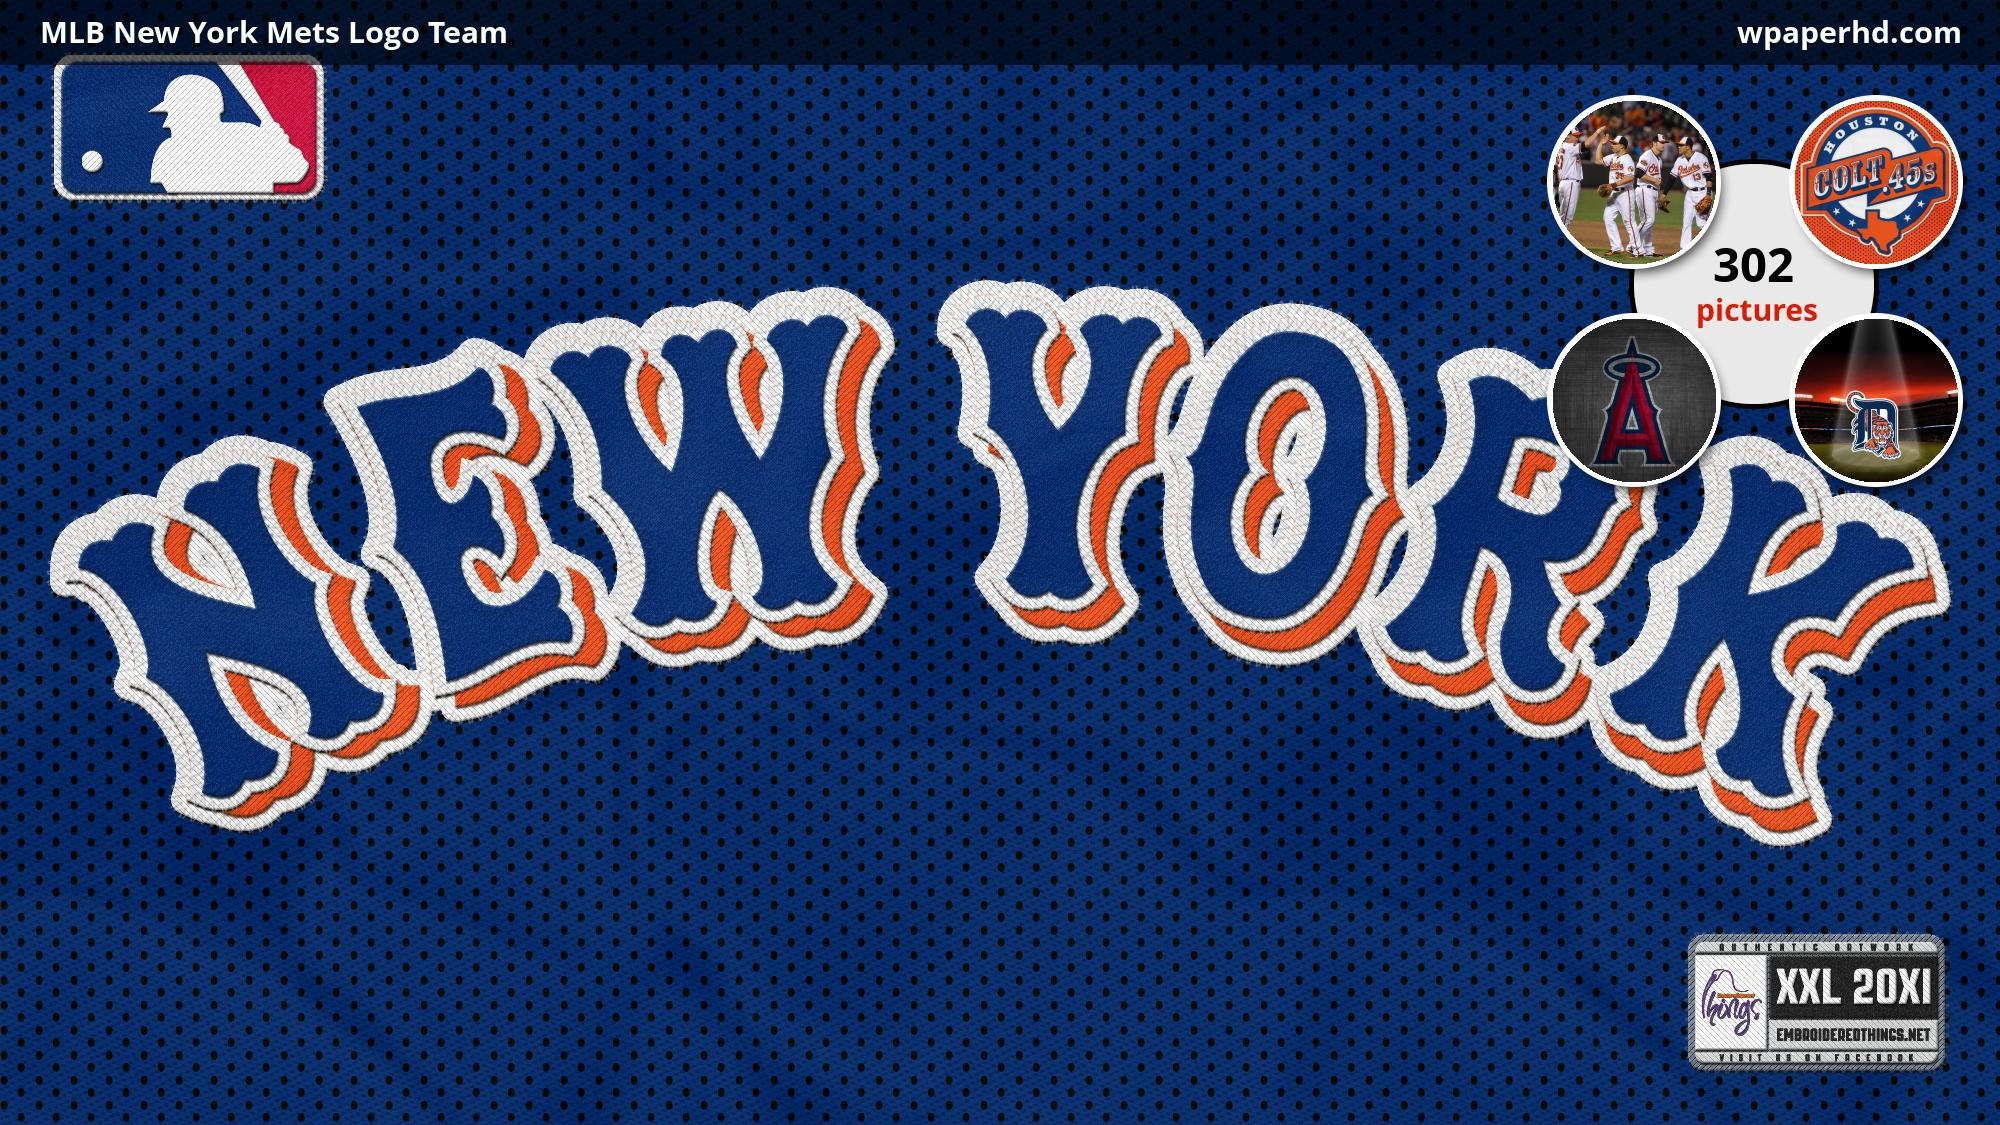 2000x1125 ... York Mets Logo Team wallpaper, where you can download this picture in  Original size and ...